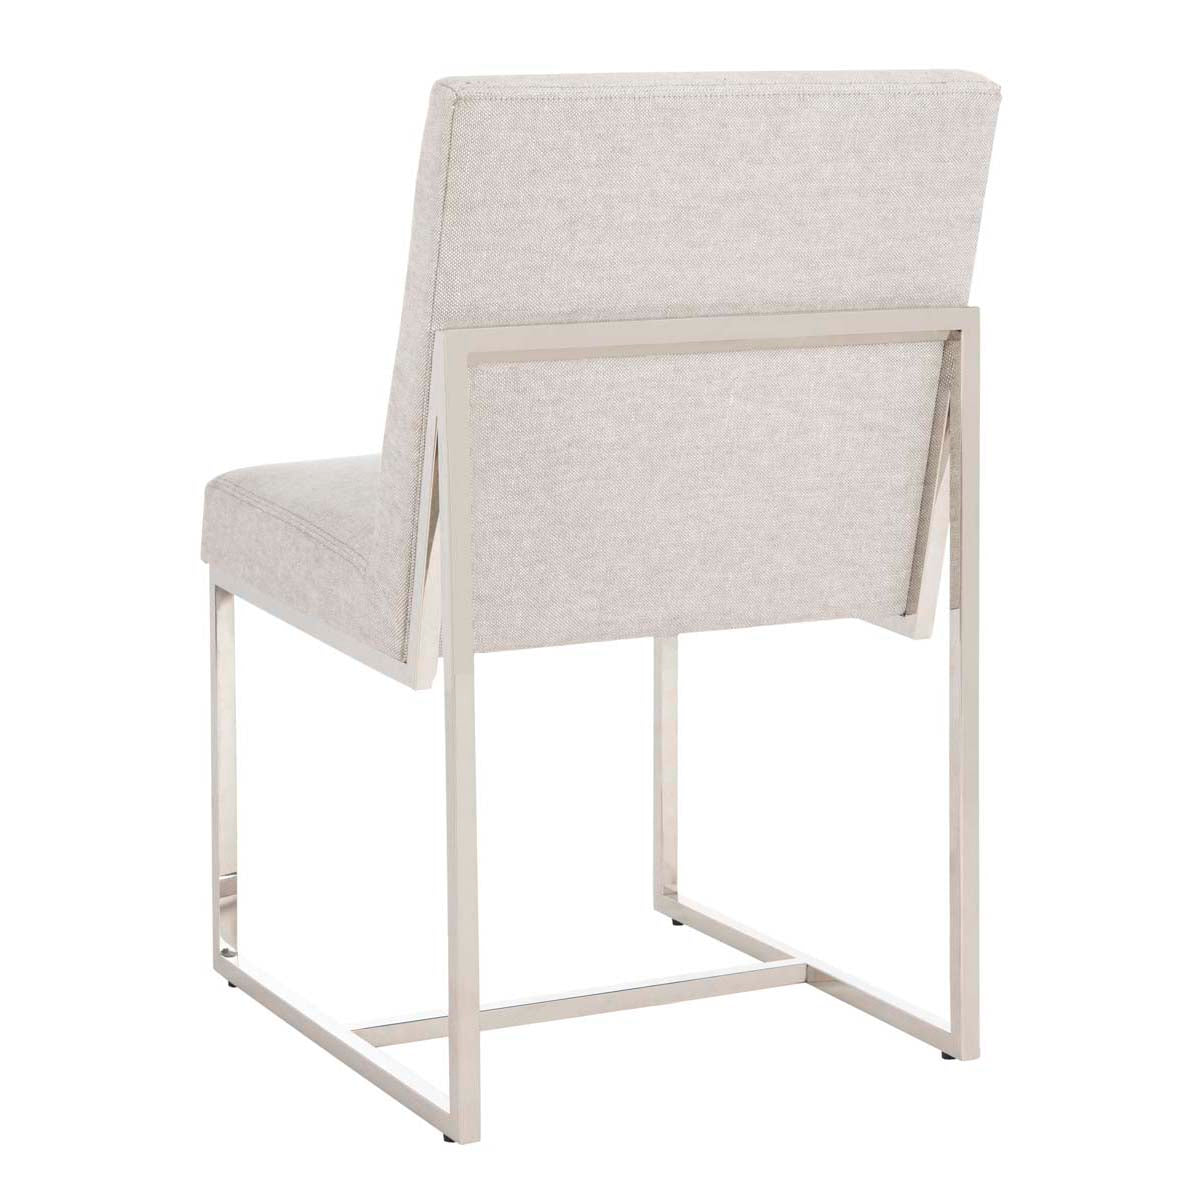 Safavieh Couture Lombardi Chrome Dining Chair - Grey / White